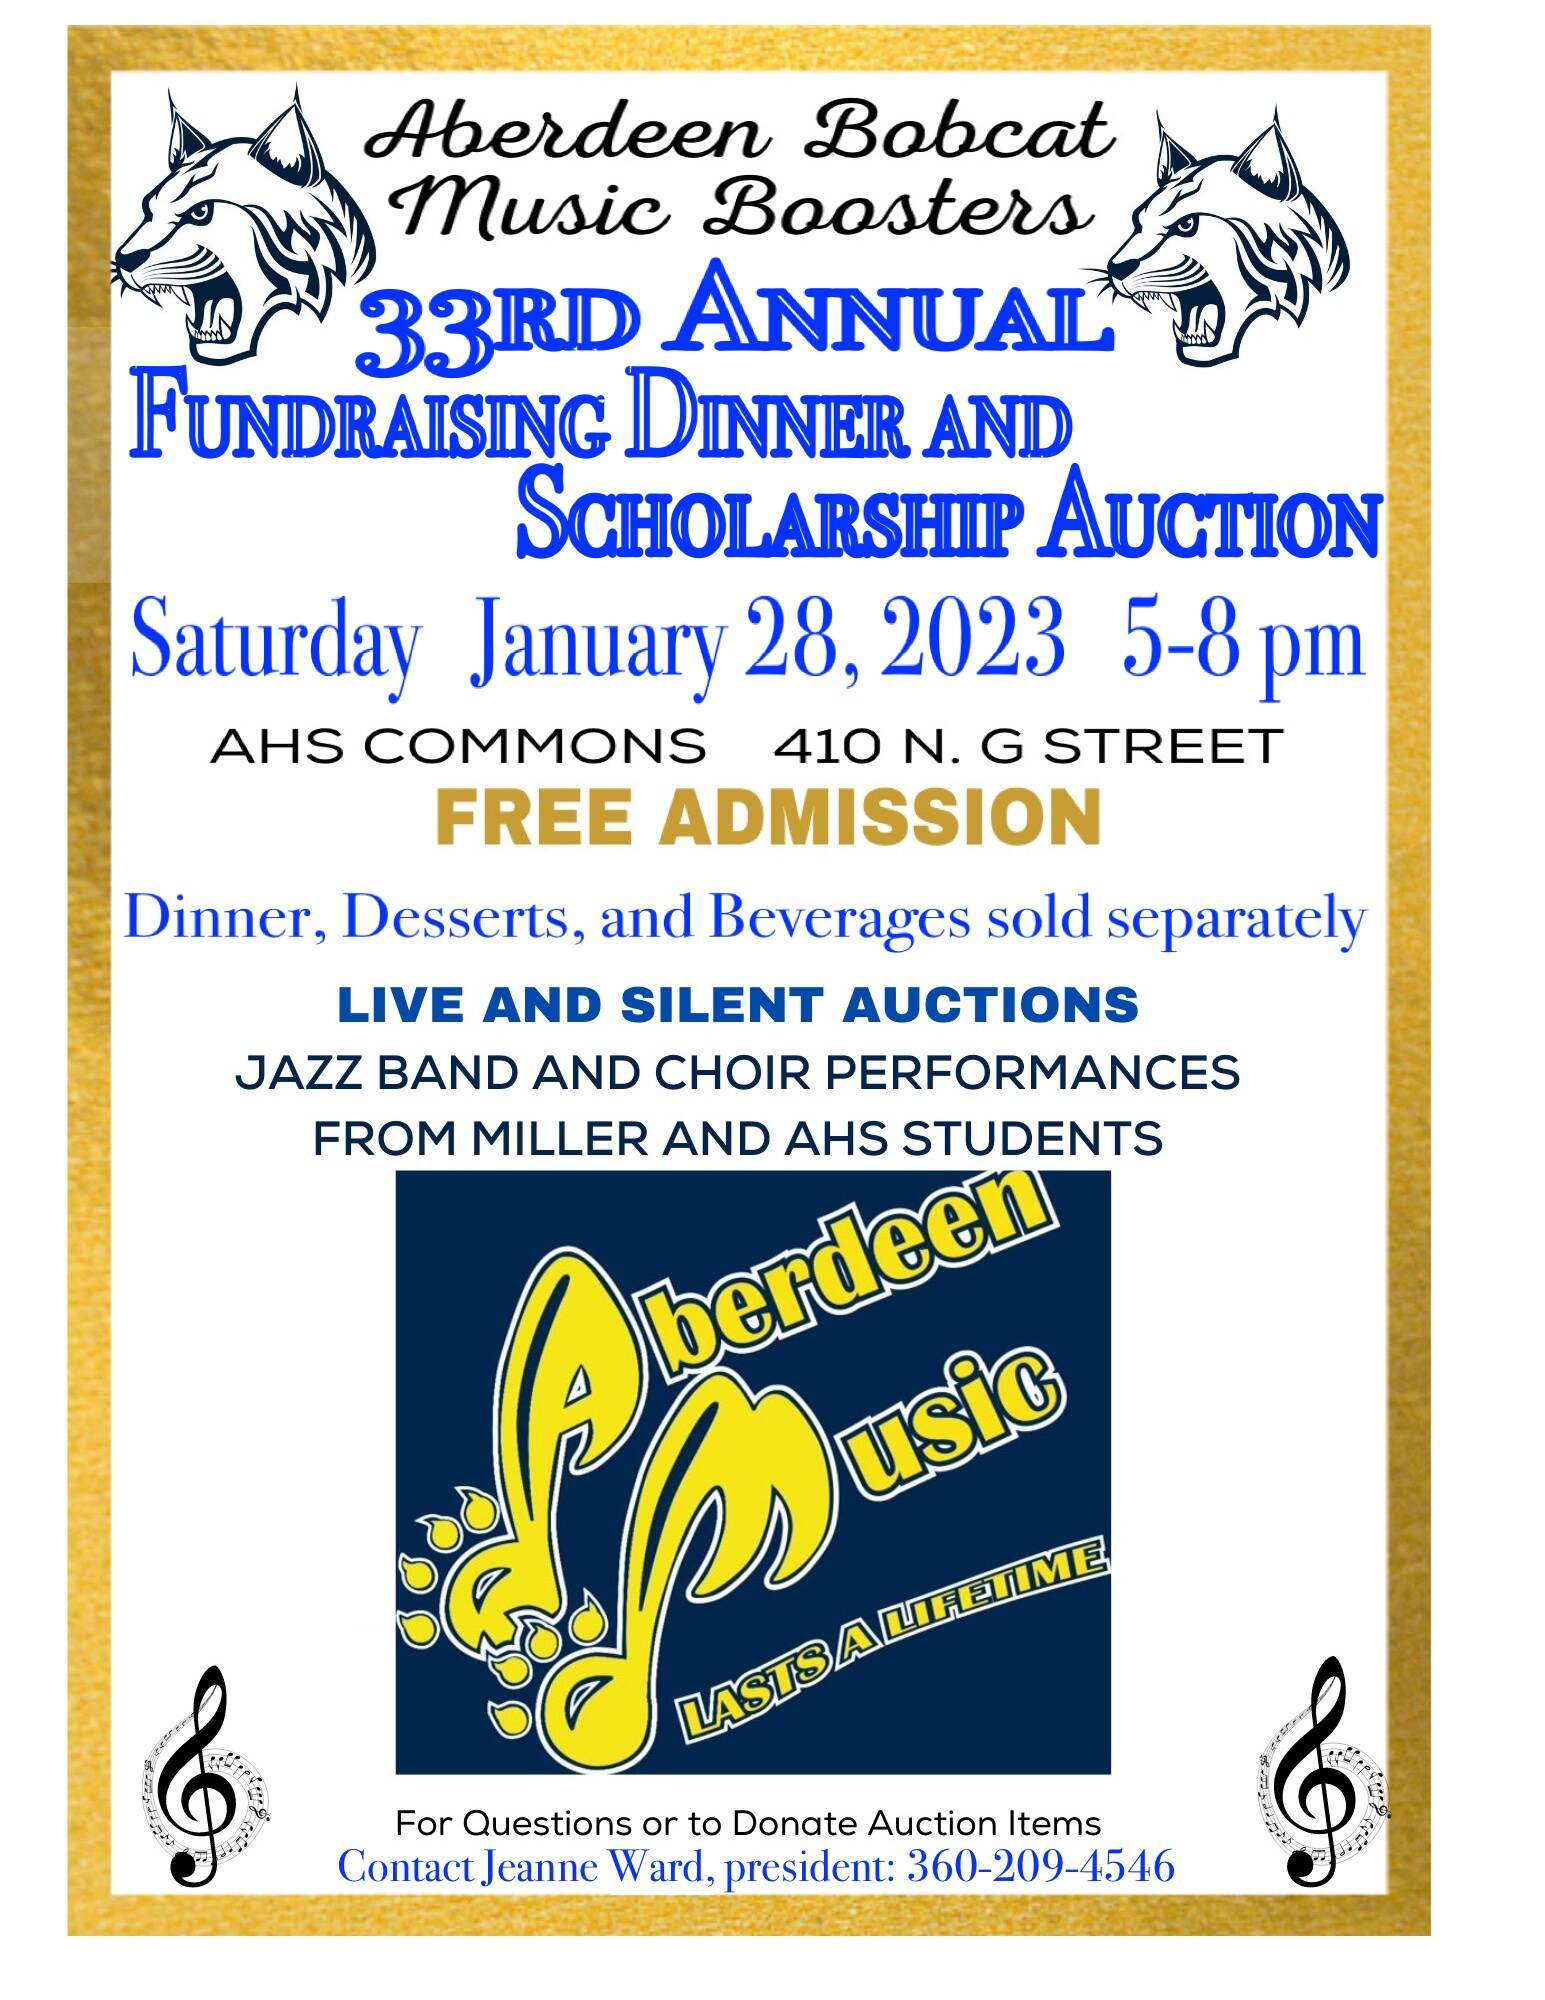 The fundraiser was viewed as the “single most important,” fundraiser of the year for music students. (Flyer provided by Aberdeen Bobcat Music Boosters)